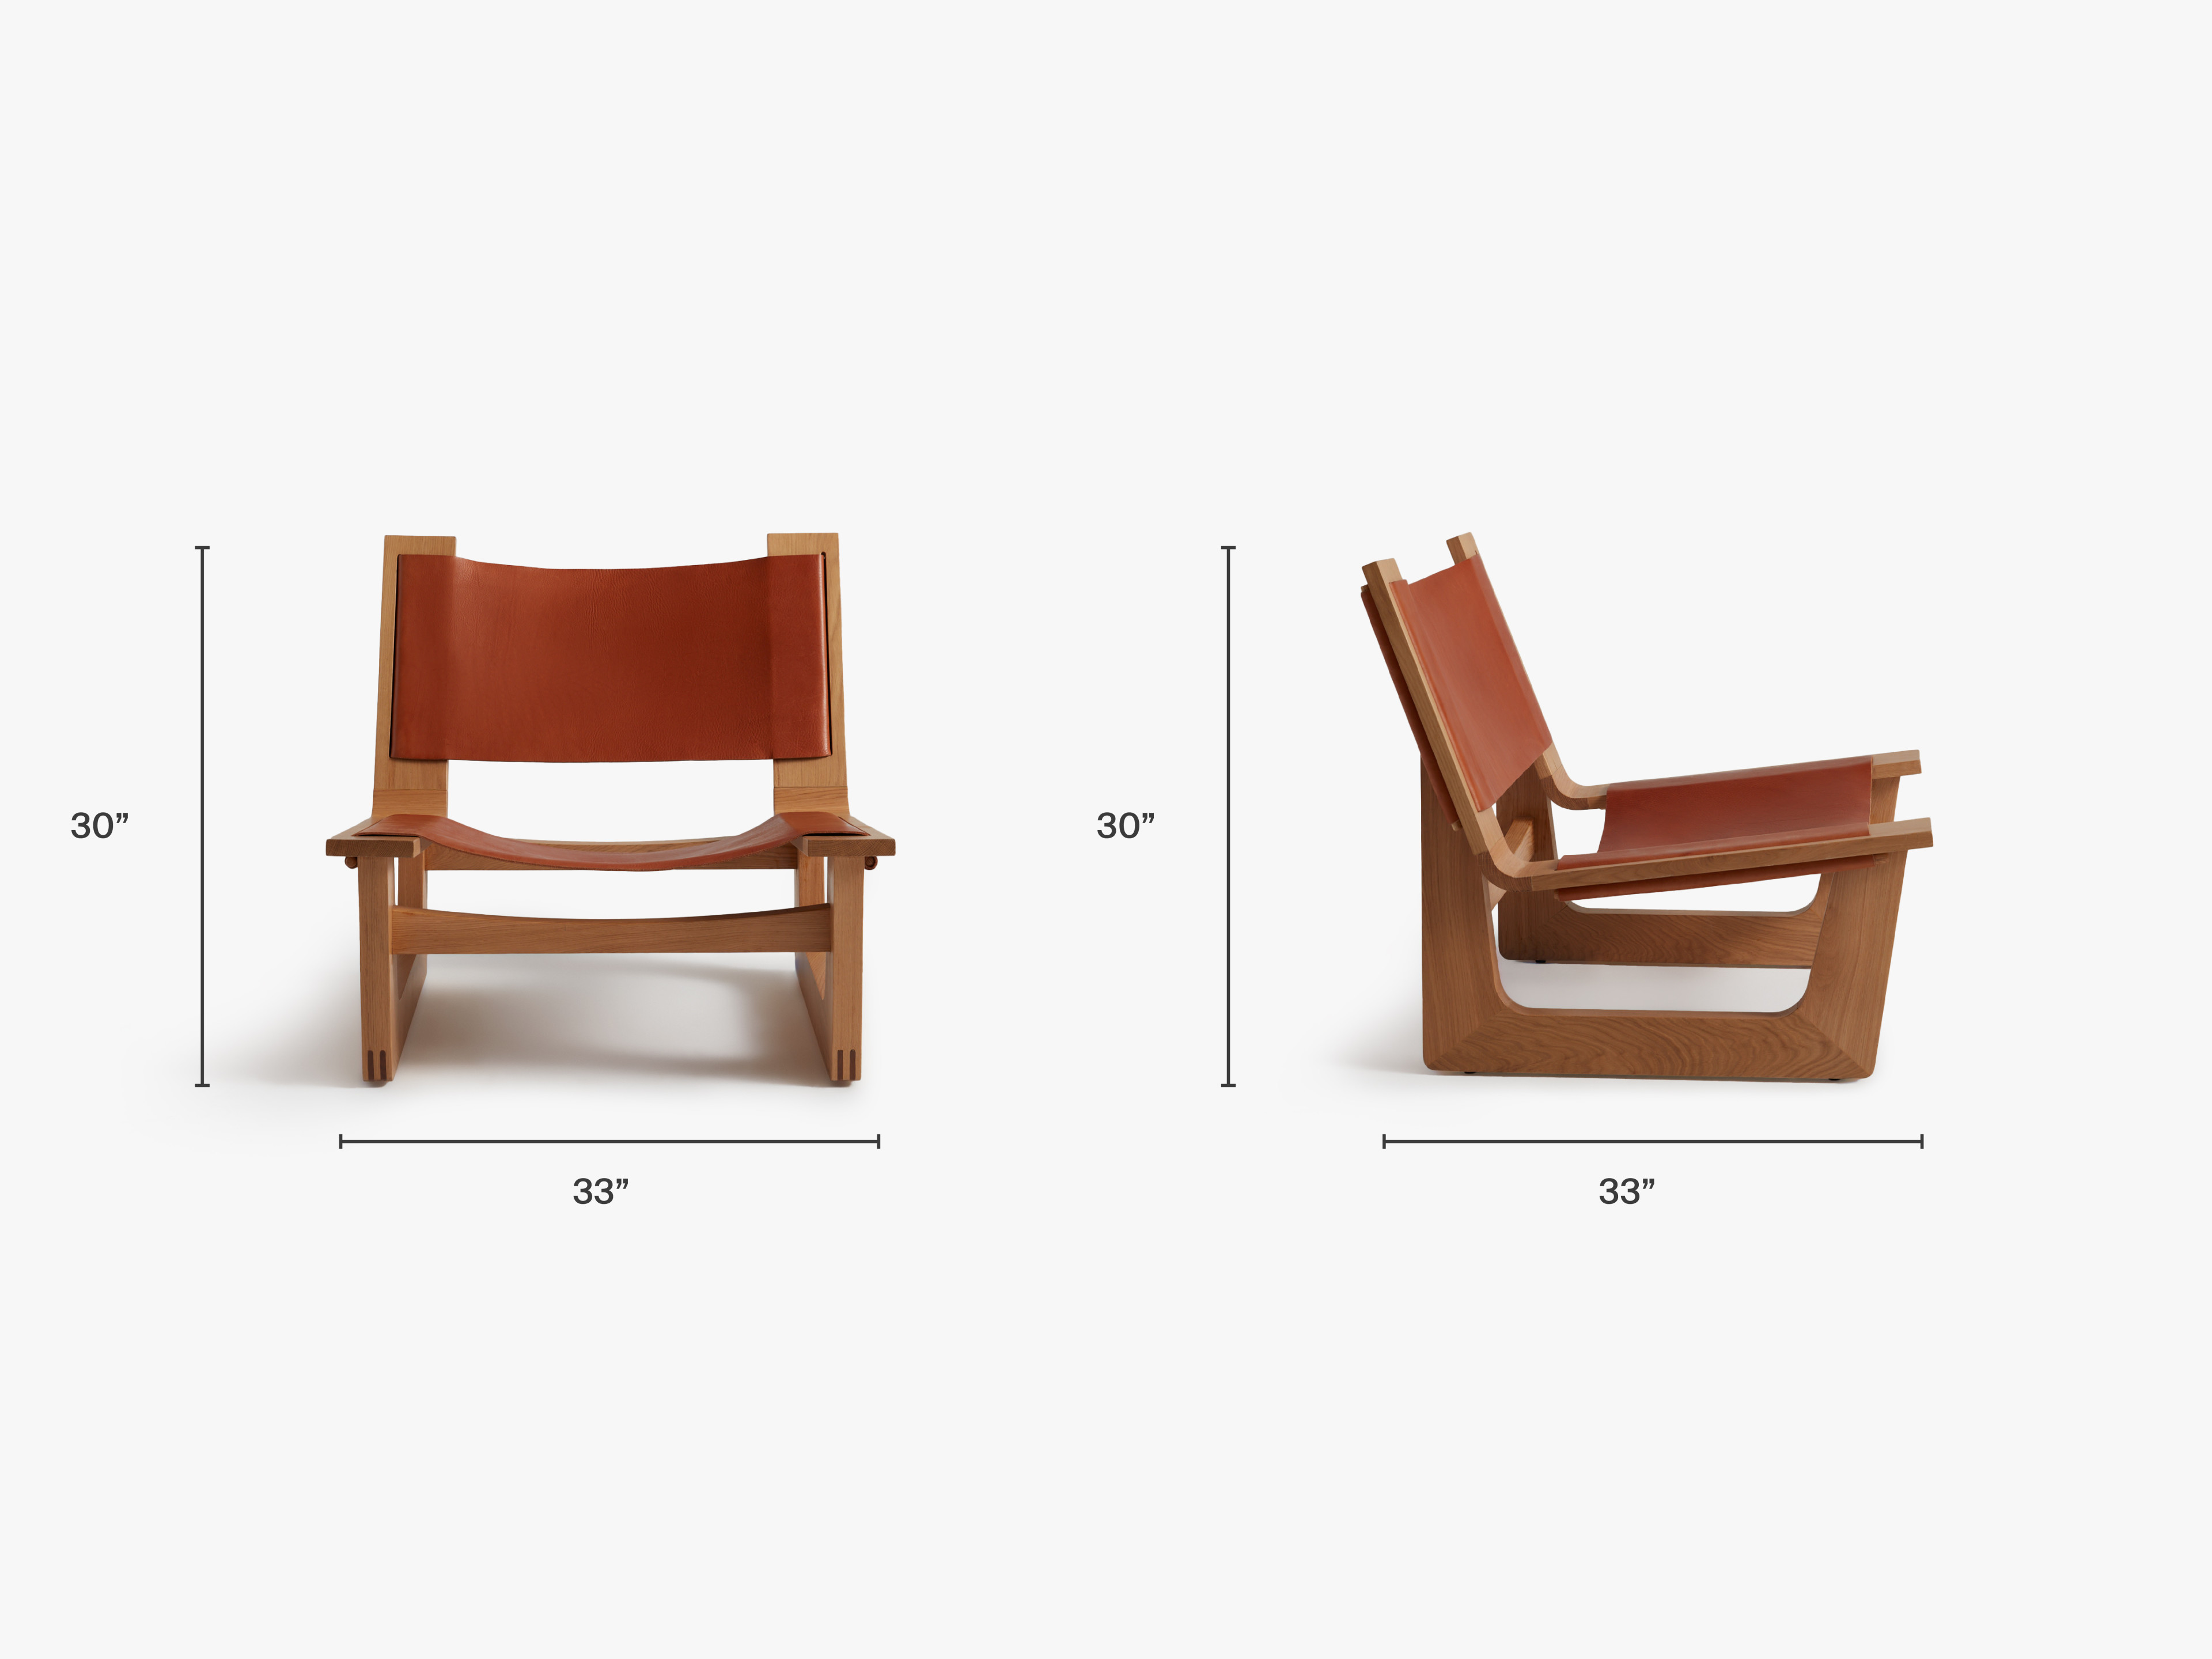 LeatherSlingChair-Furniture Dimensions